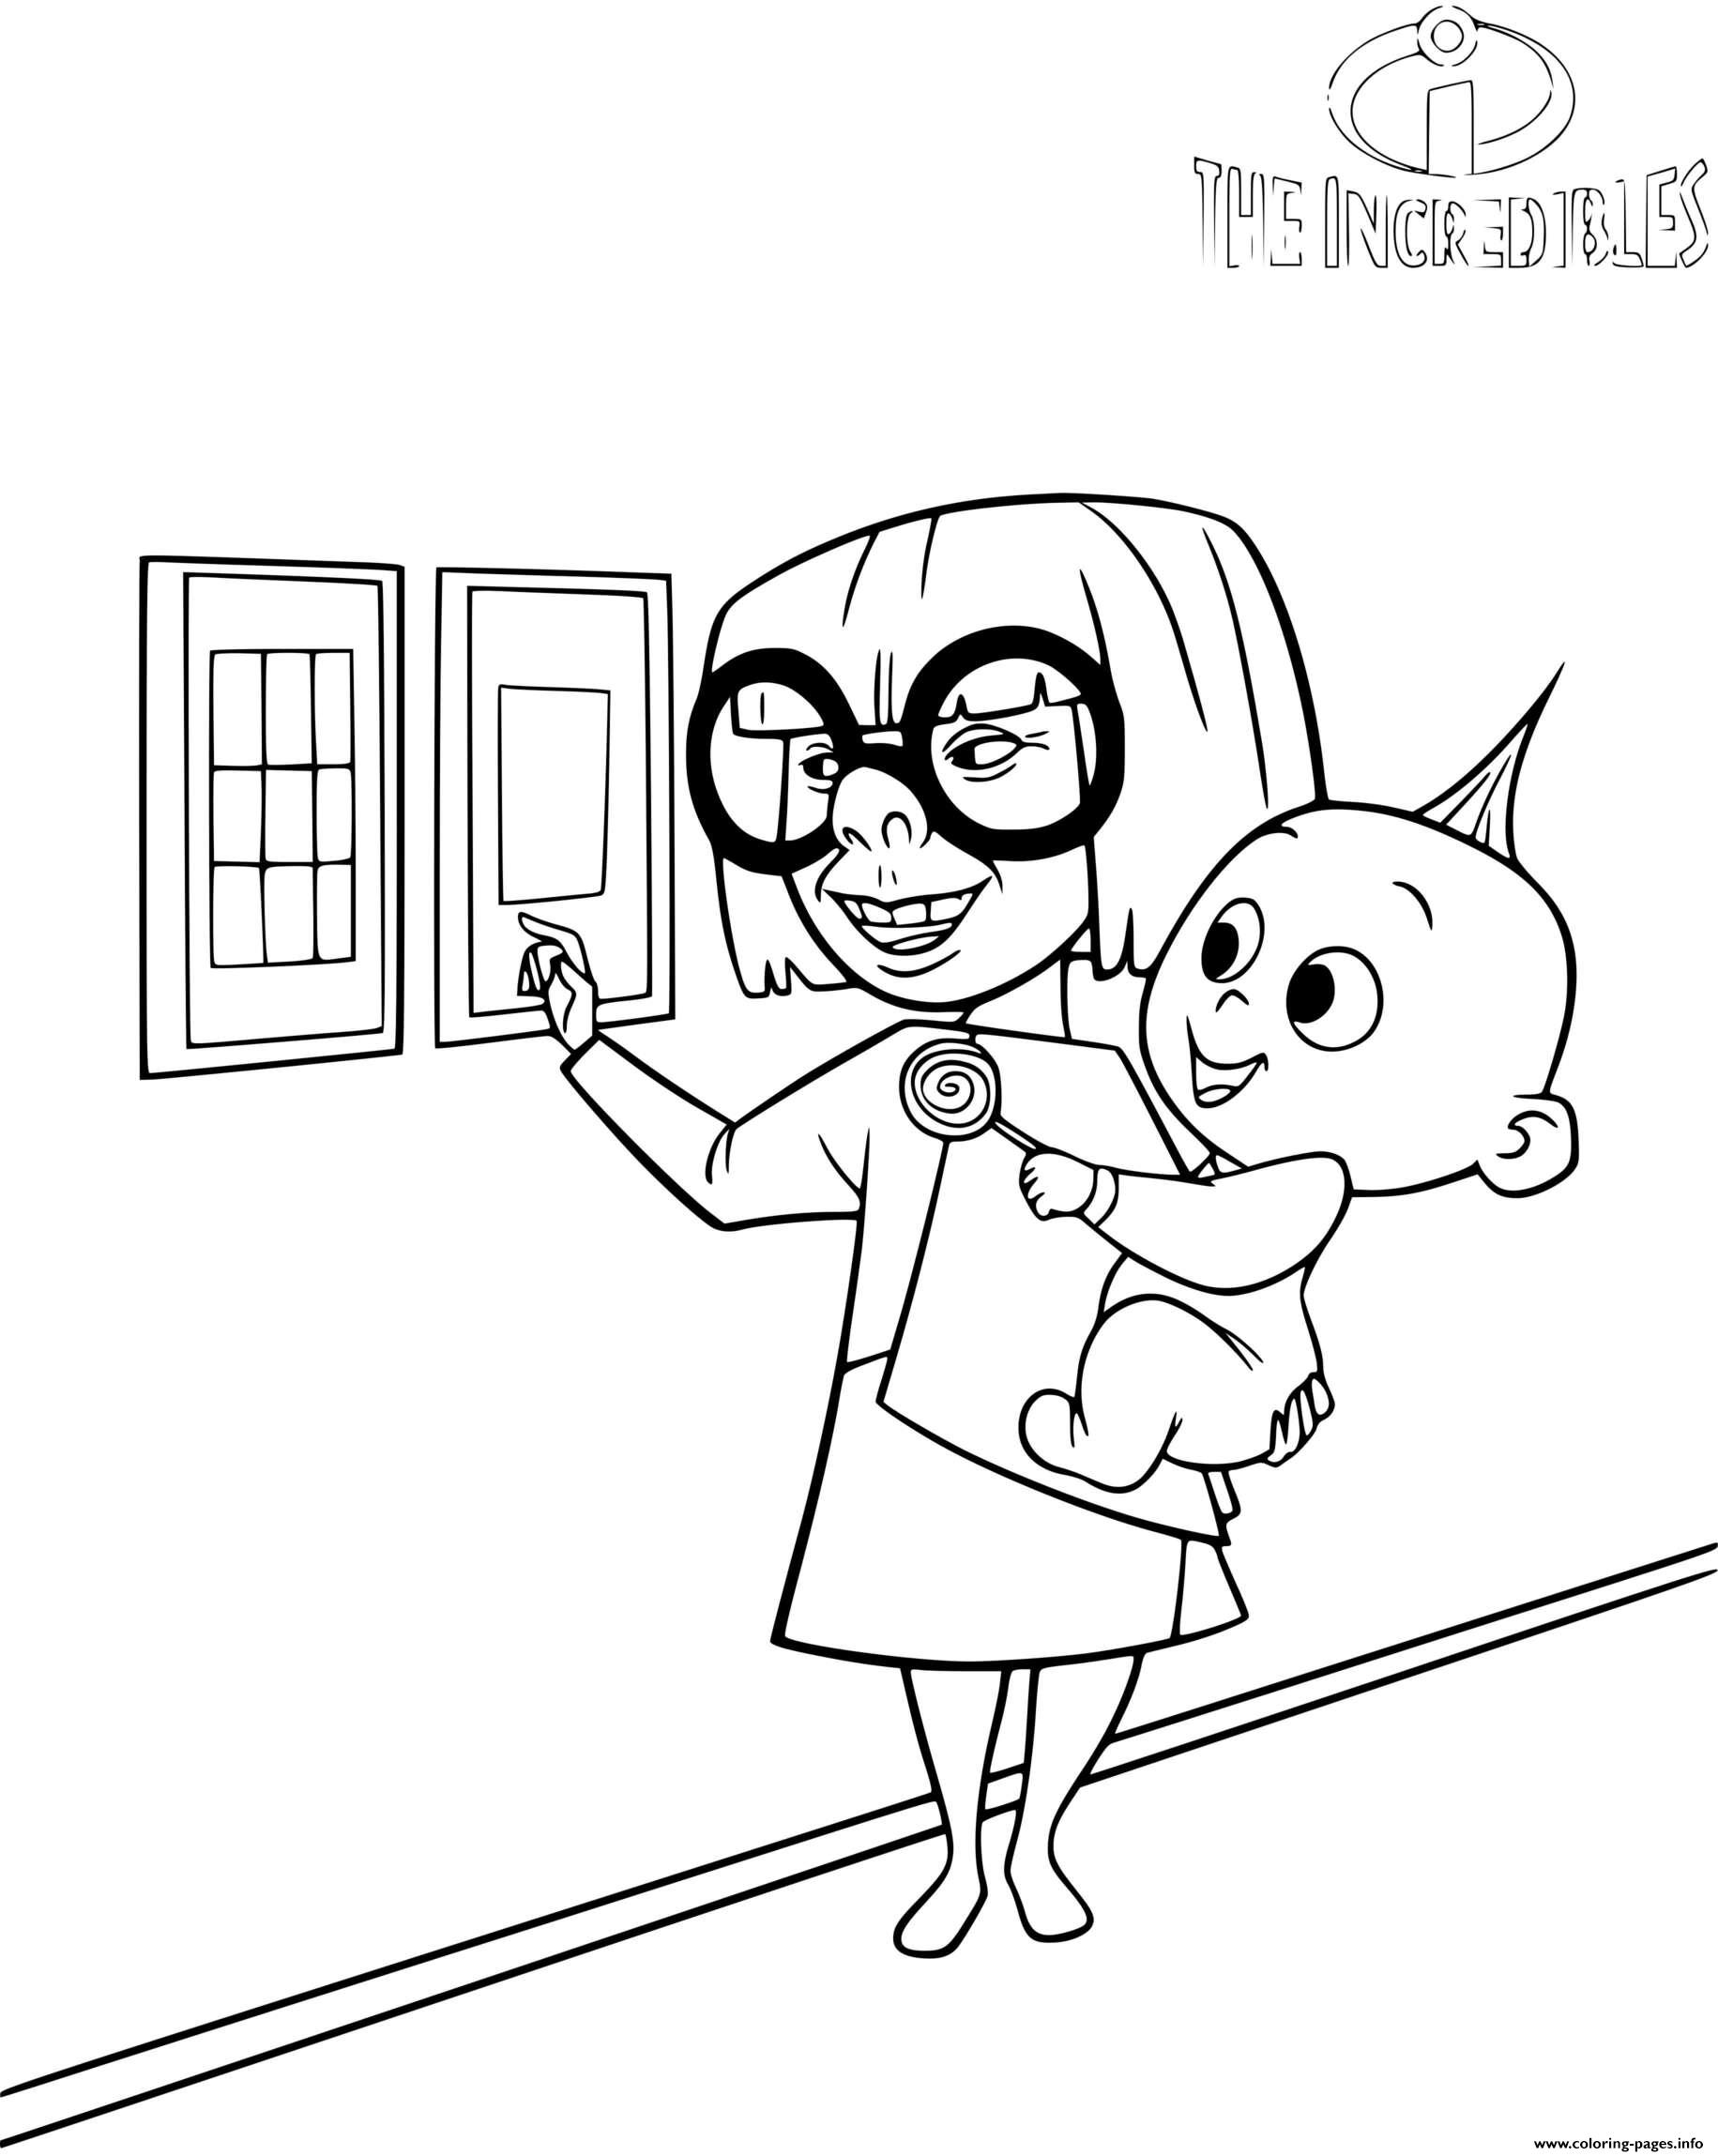 Edna Mode And Jack Jack coloring